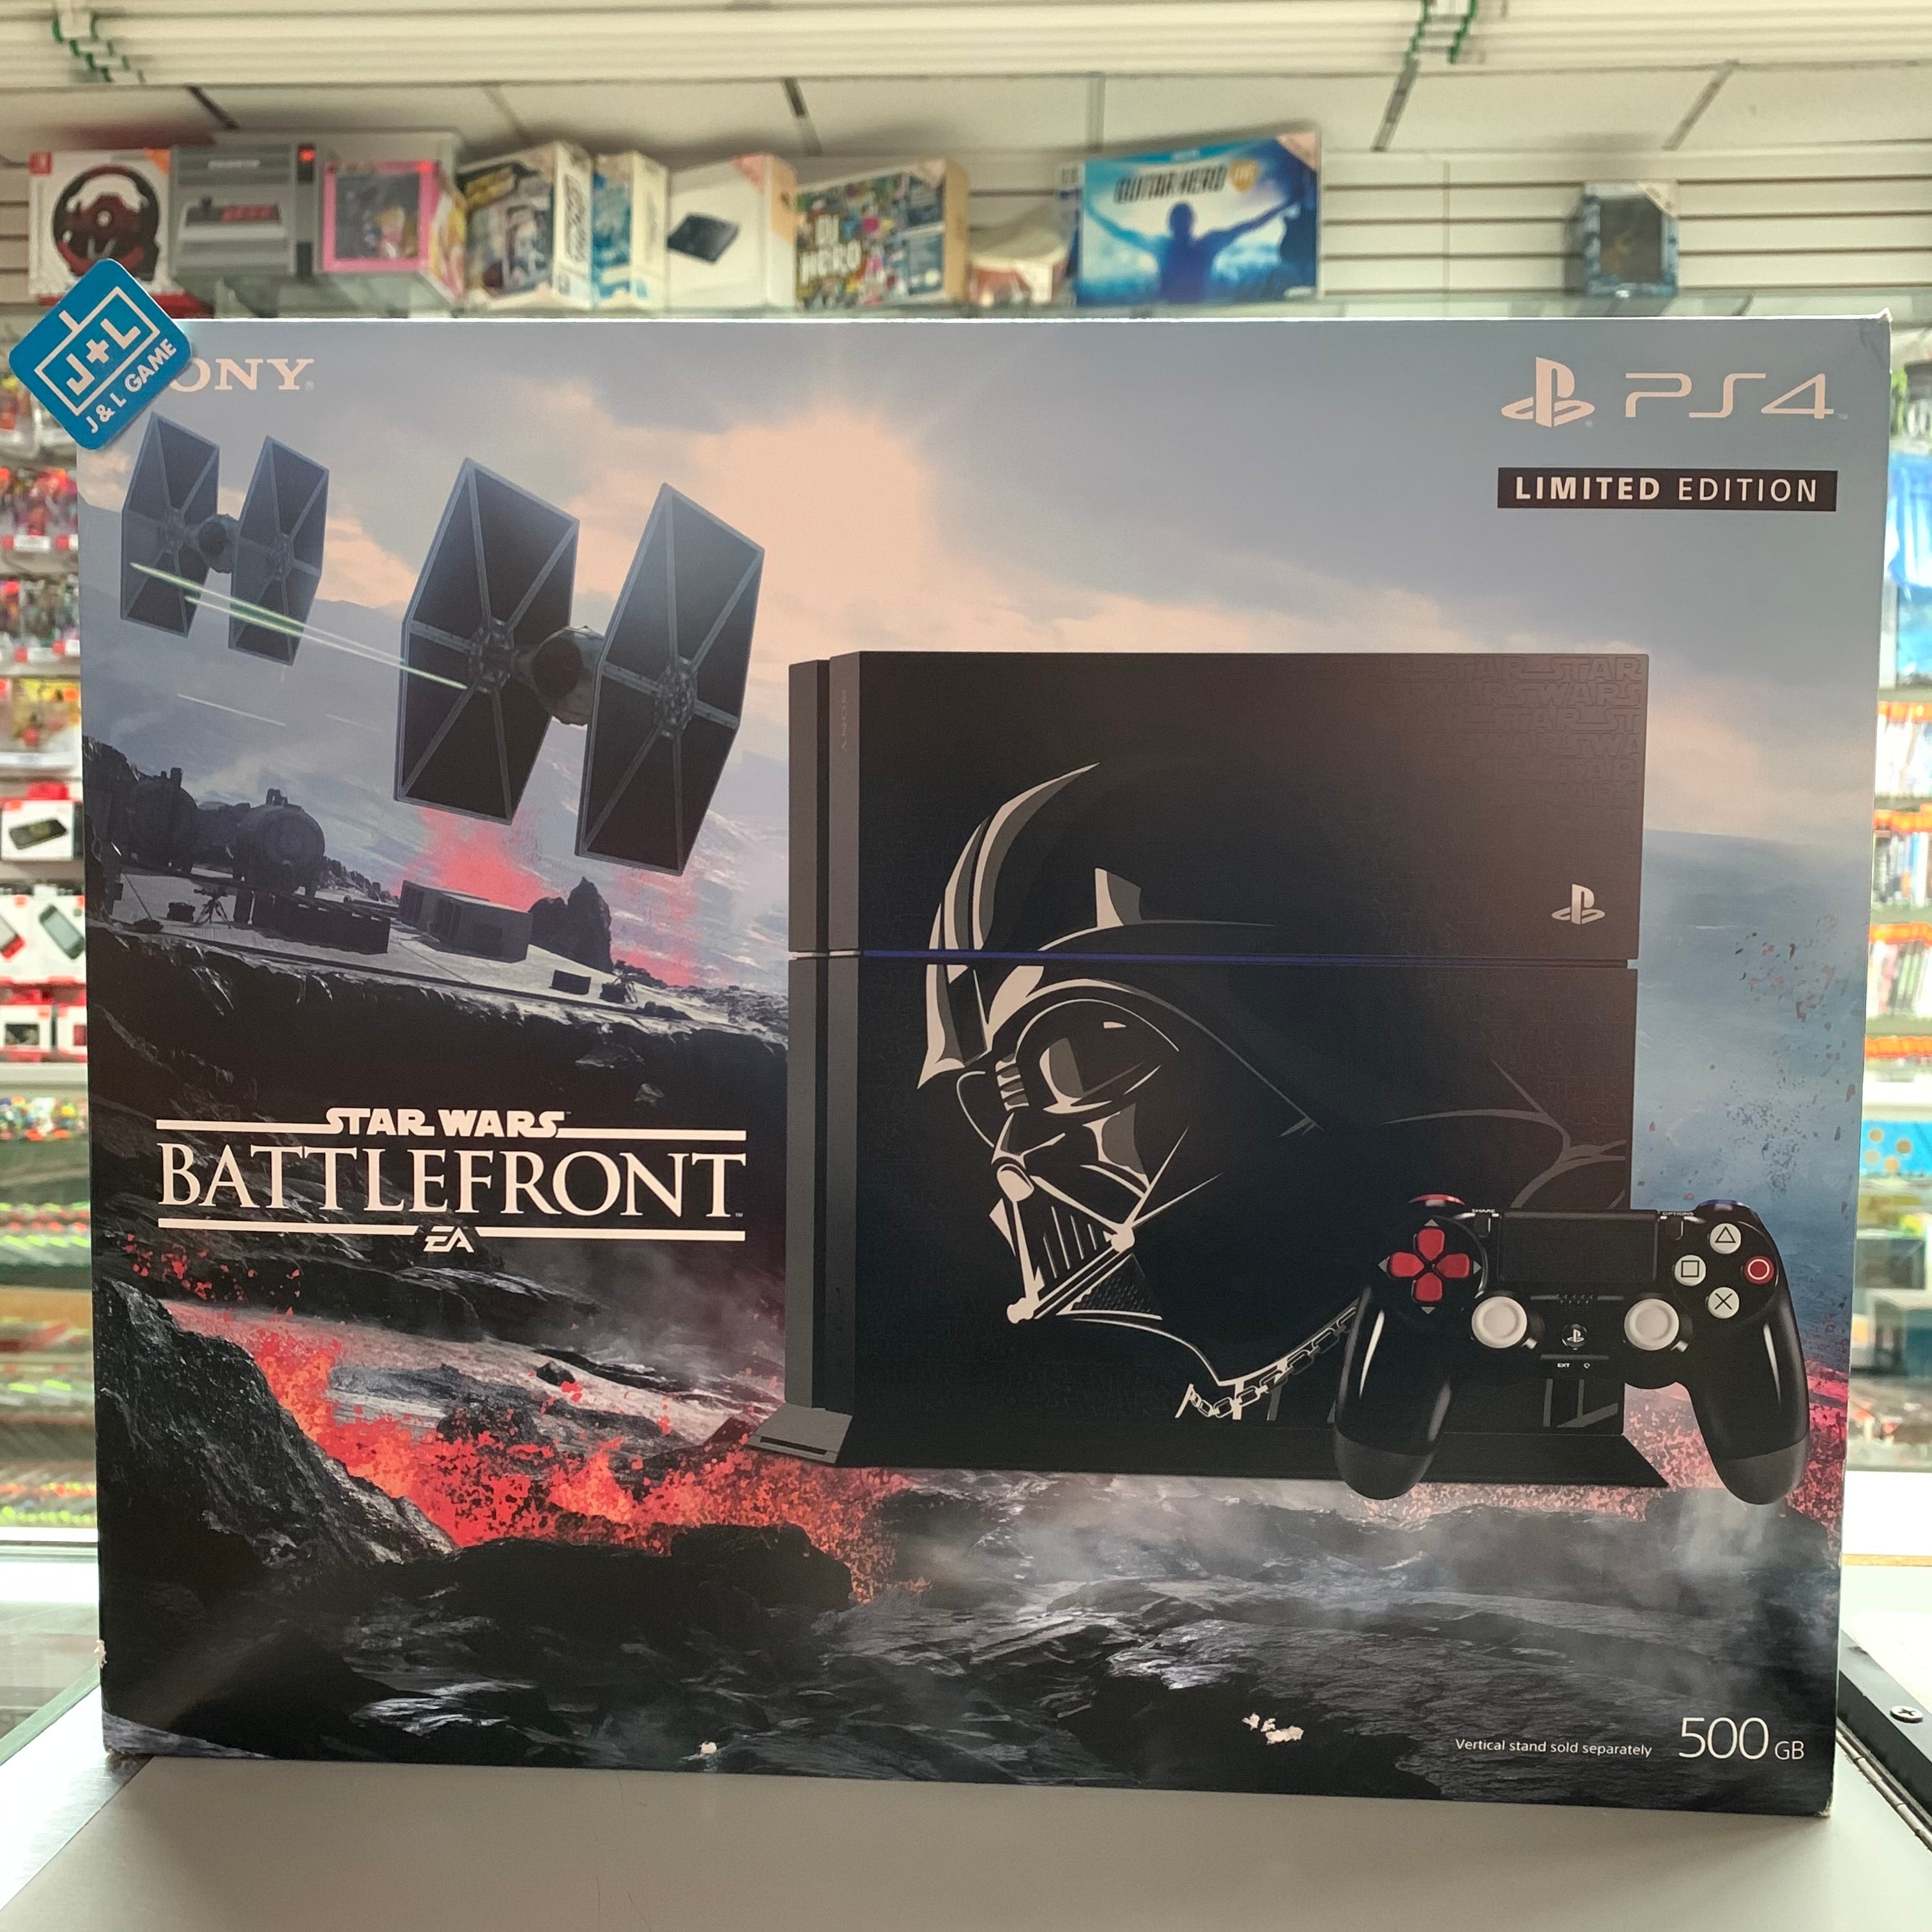 Sony PlayStation 4 500GB Console - Star Wars Battlefront Limited Edition Bundle - (PS4) Playstation 4 Consoles Sony   